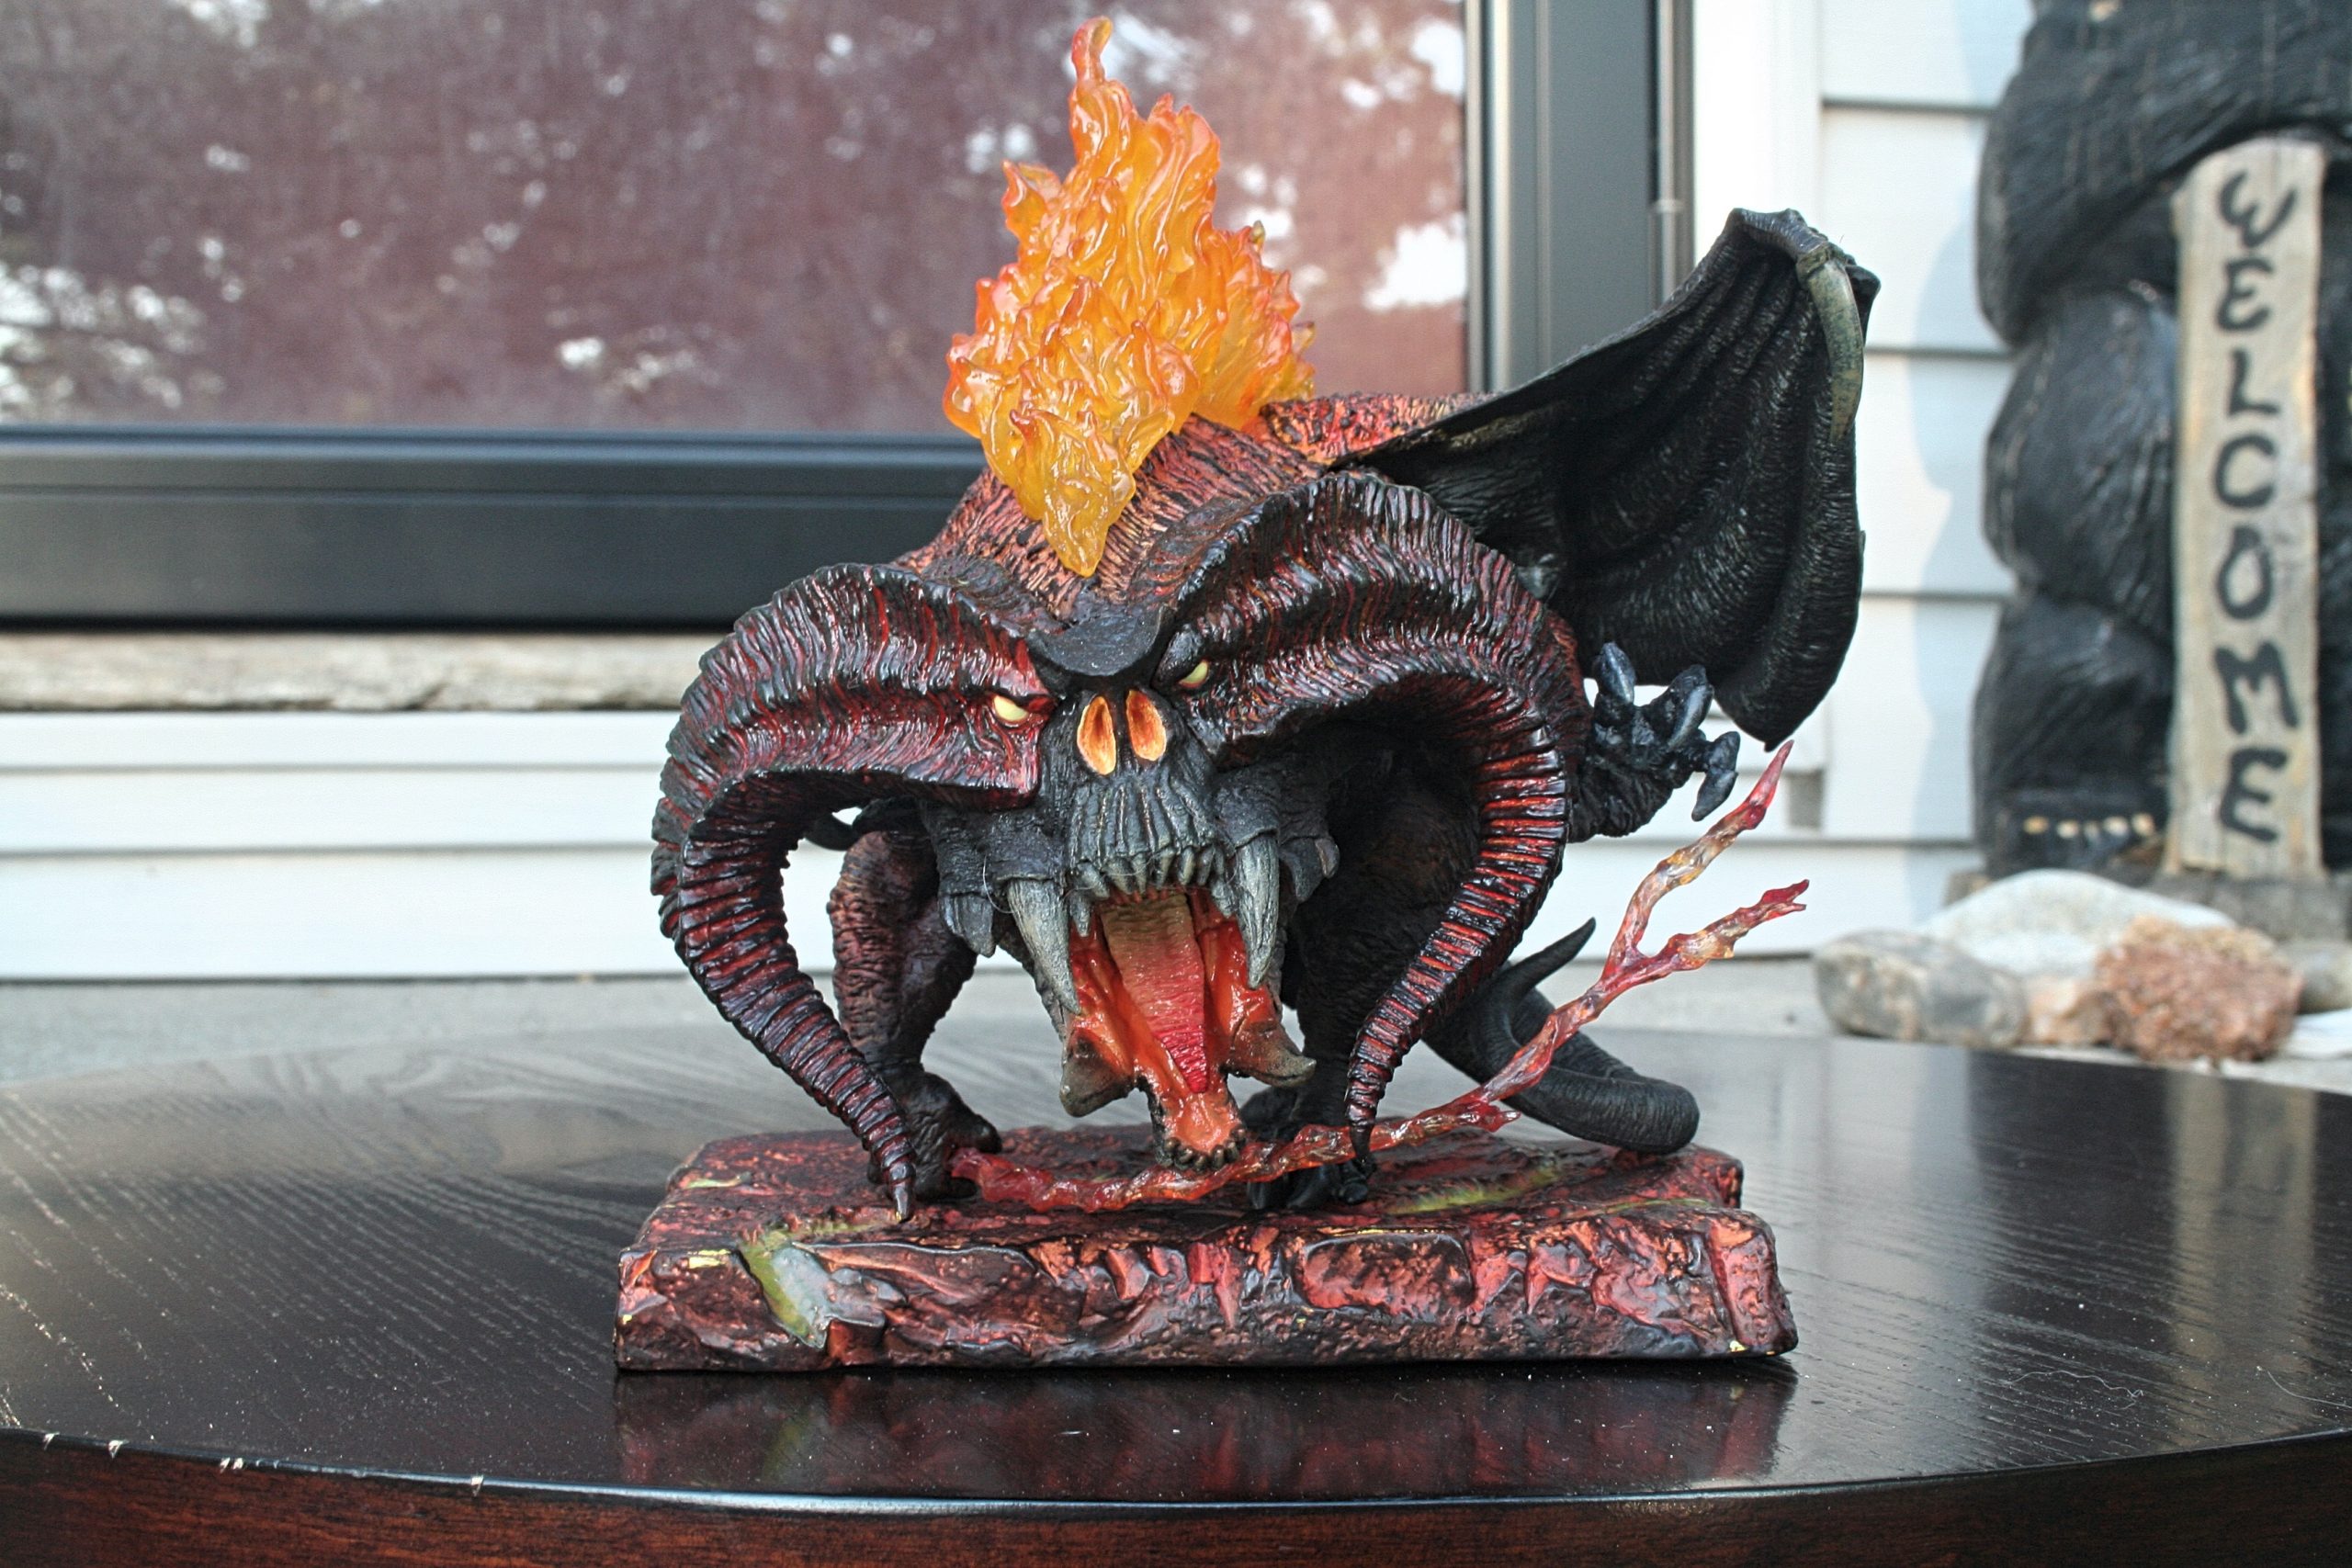 Check out this balrog from Lord of the Rings by Dawid! #fyp #realism #